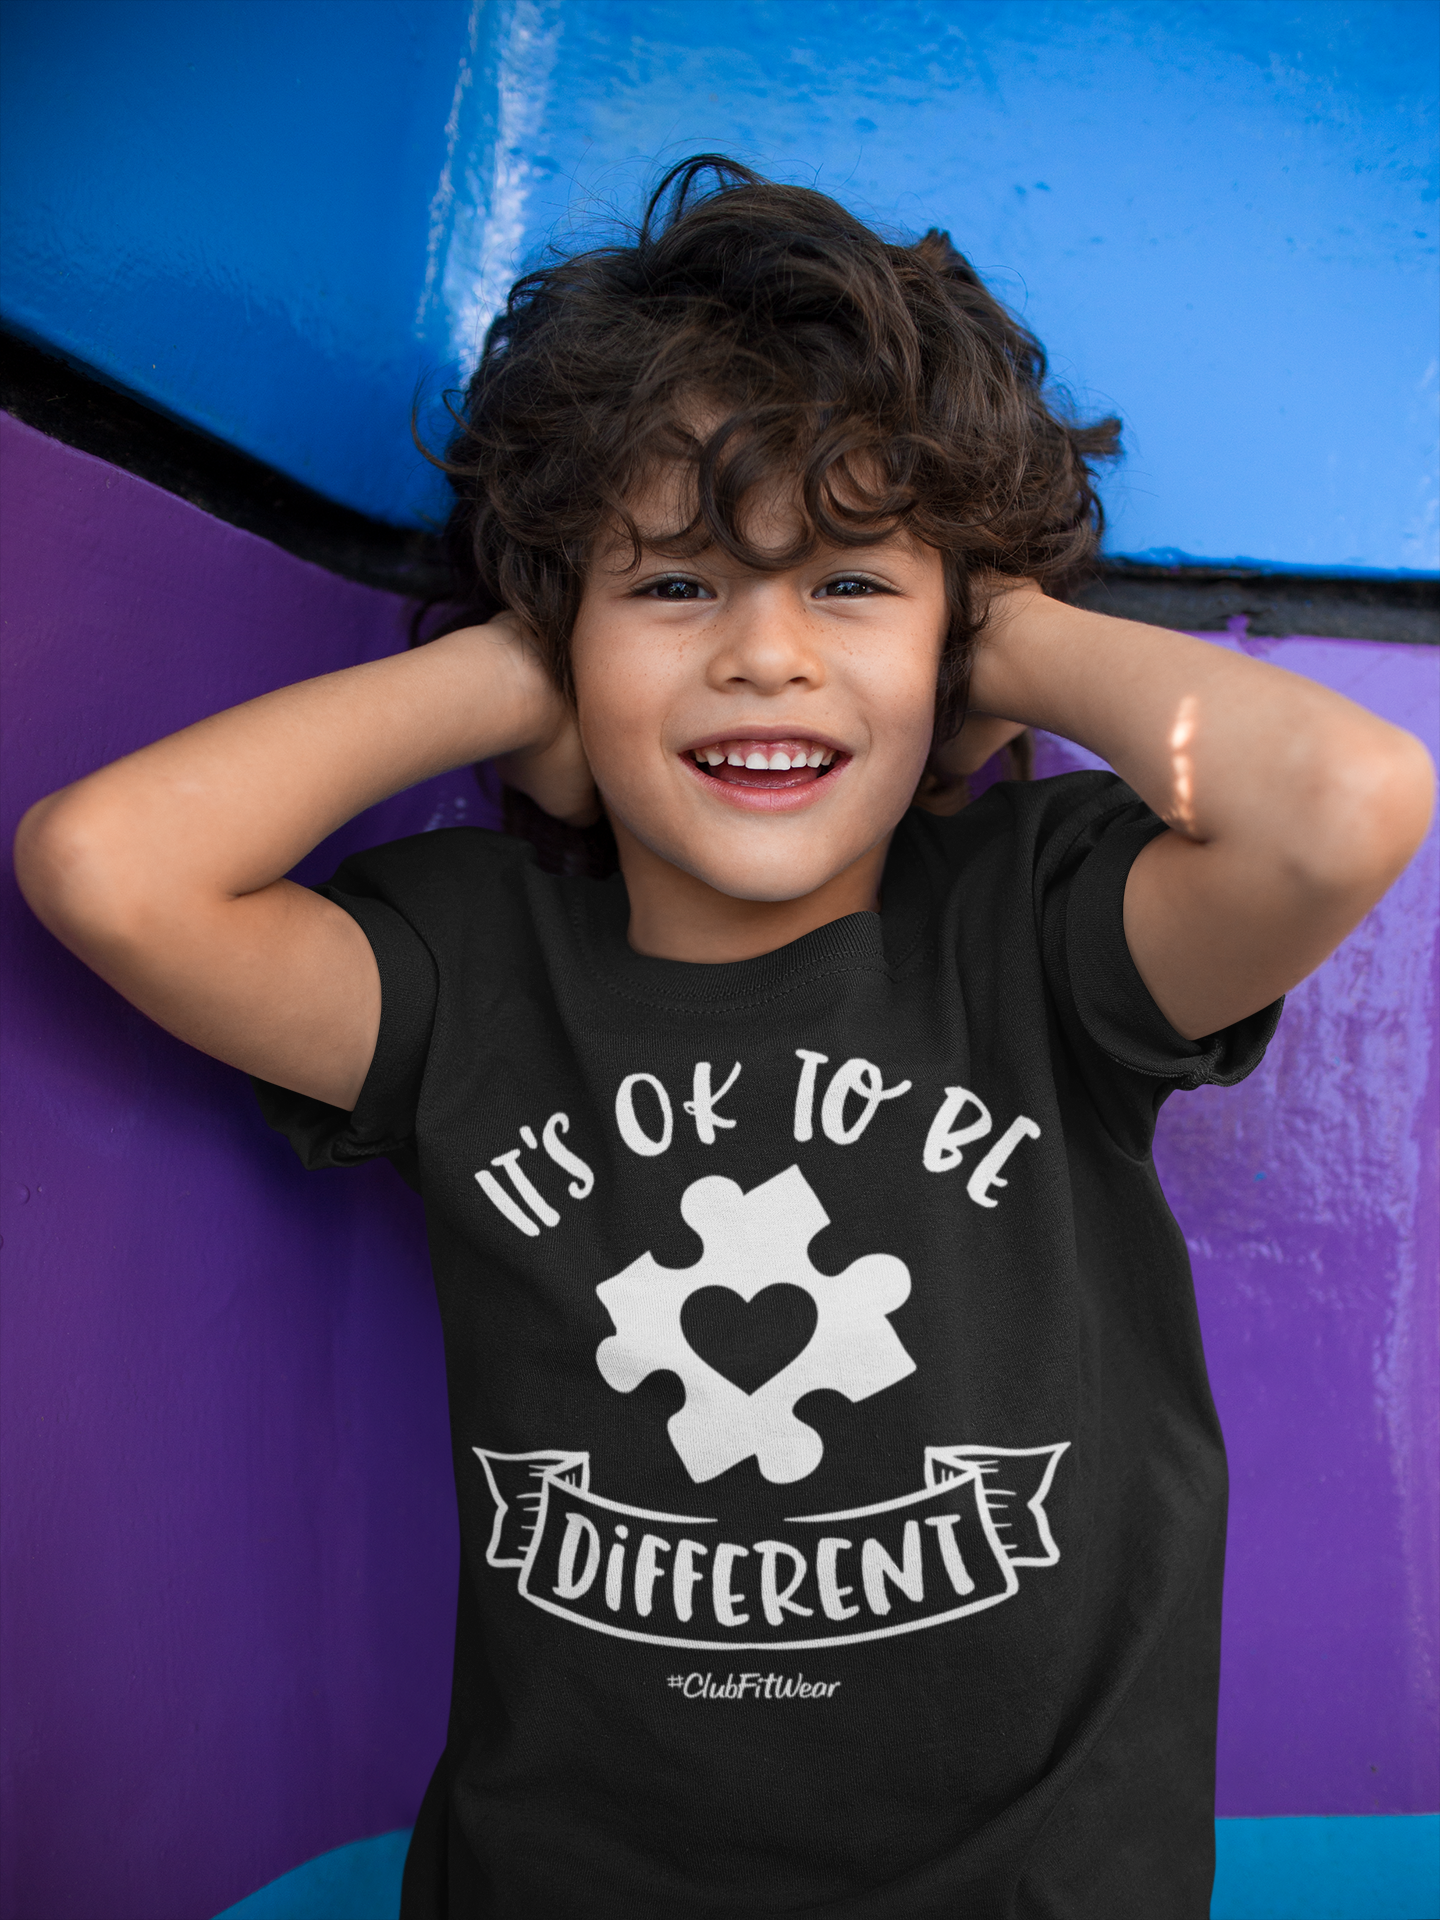 It's Ok to be Different - Autism Awareness